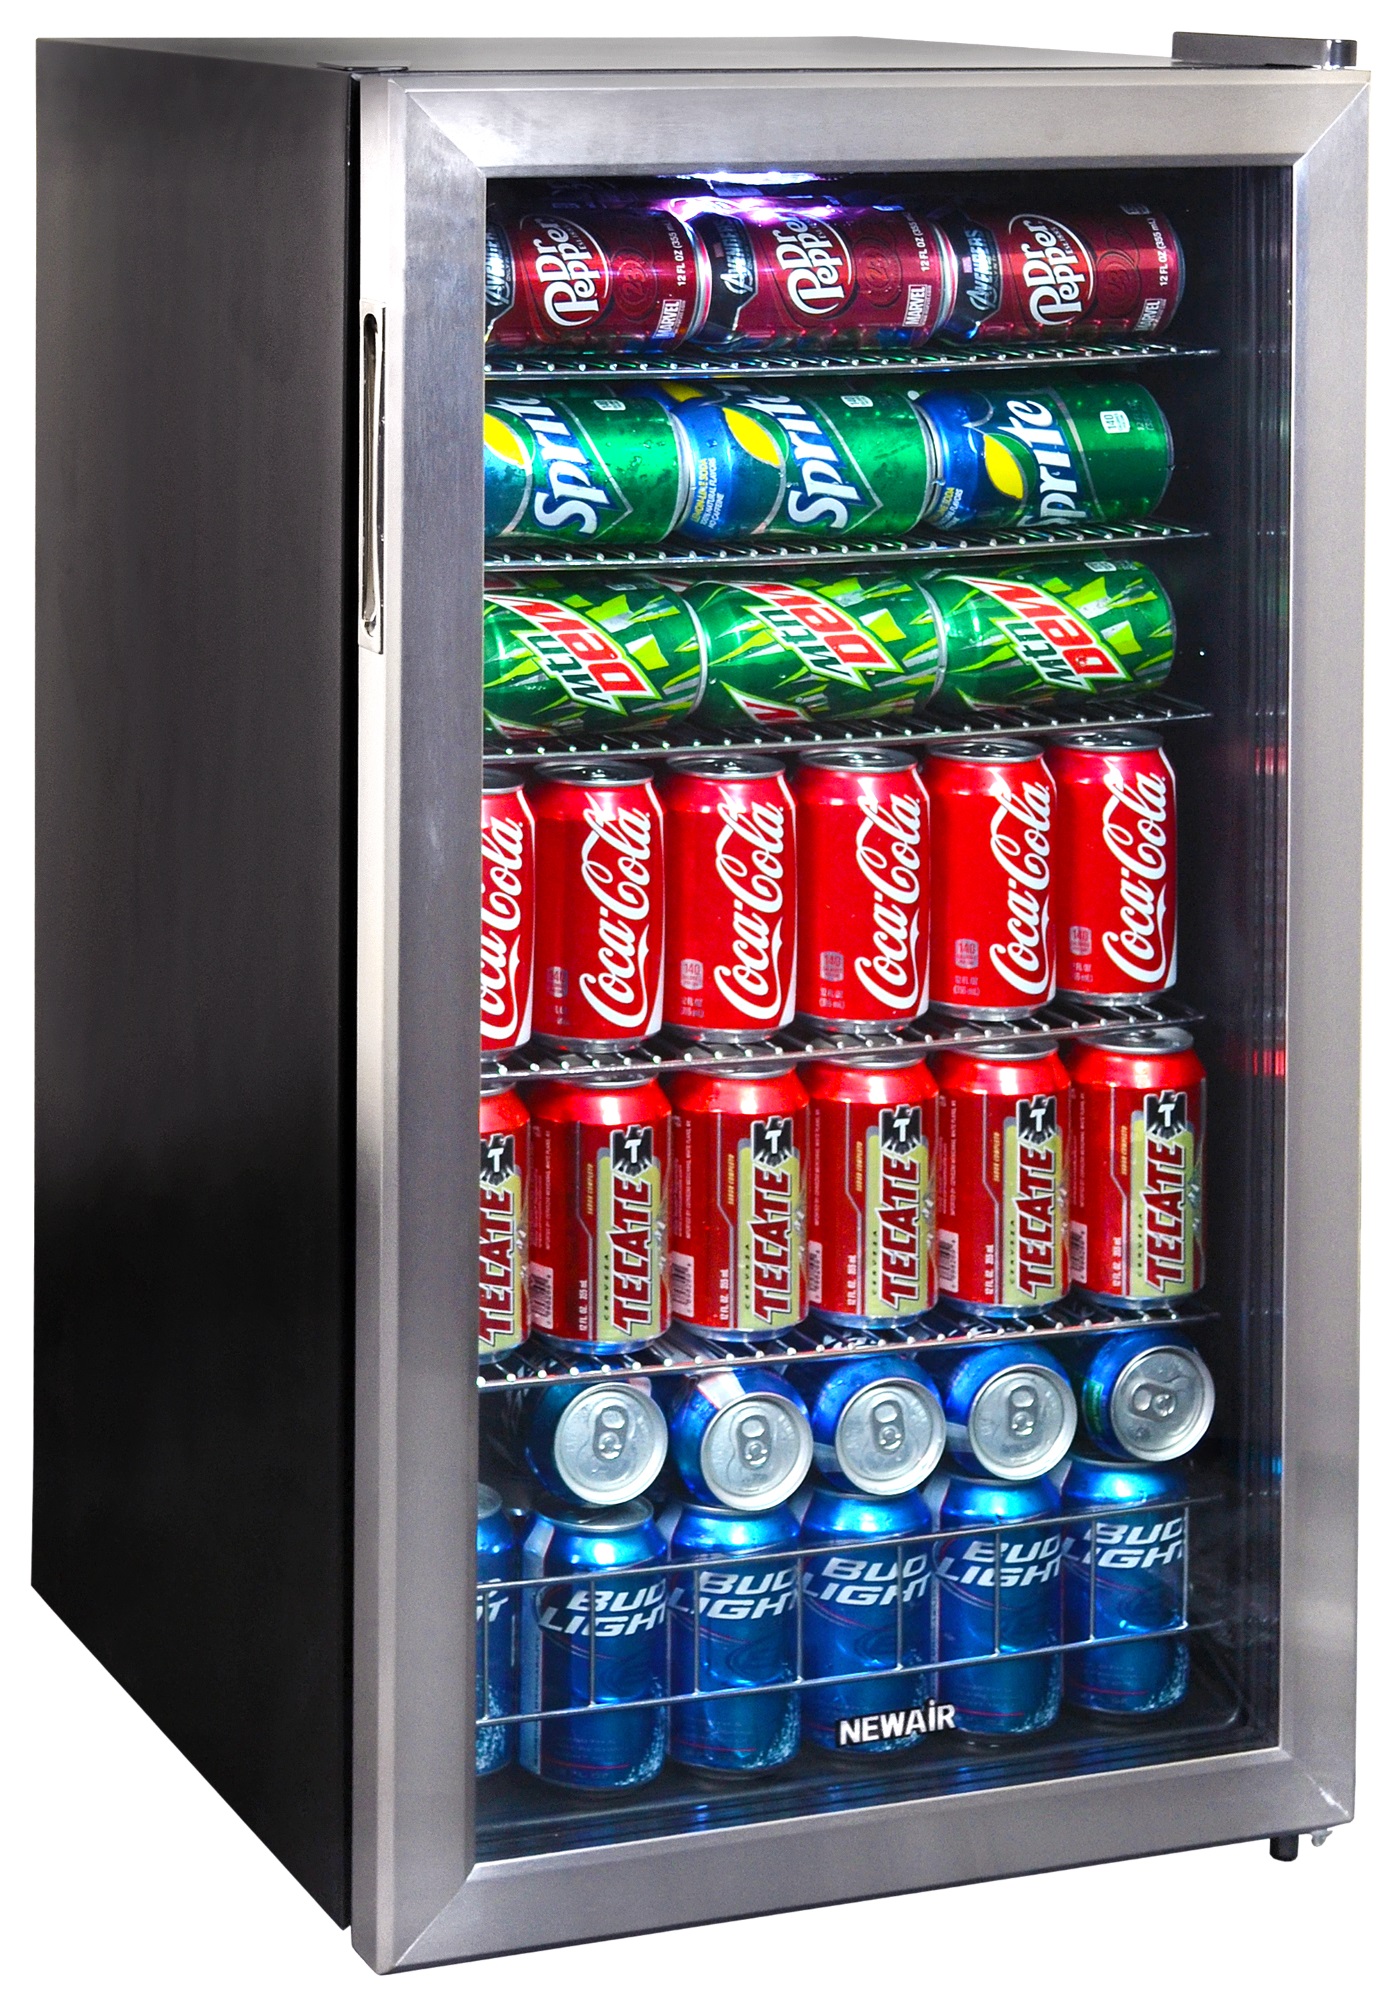 Beverage Refrigerator Cooler with 126 Can Capacity Cools to 34F Mini Bar Beer Fridge with Right Hinge Glass Door AB-1200 Stainless Steel